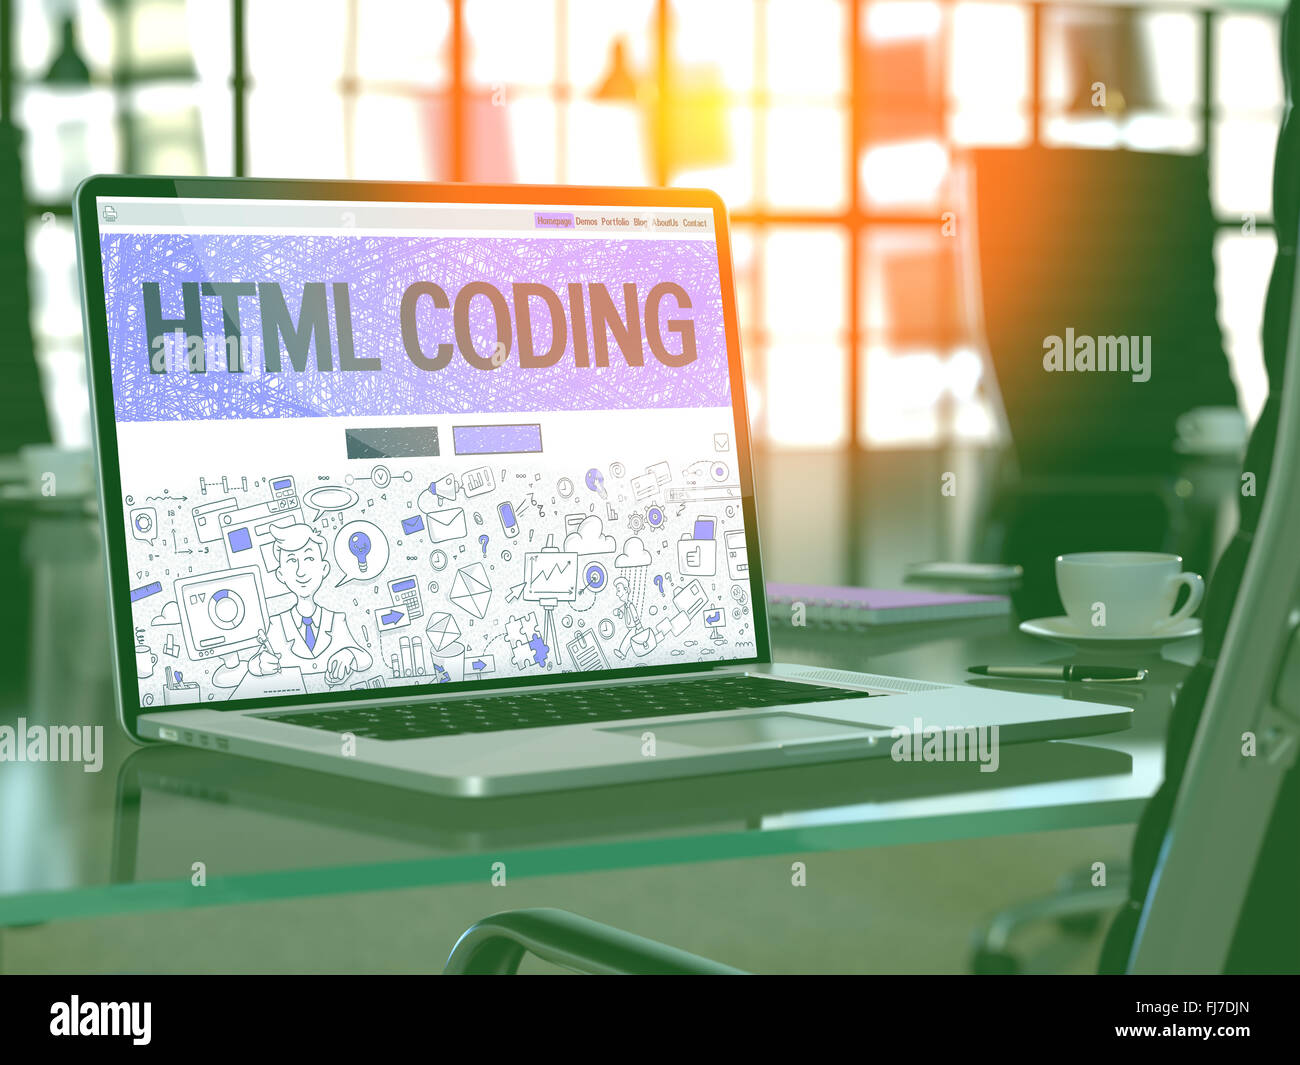 HTML Coding Concept on Laptop Screen. Stock Photo